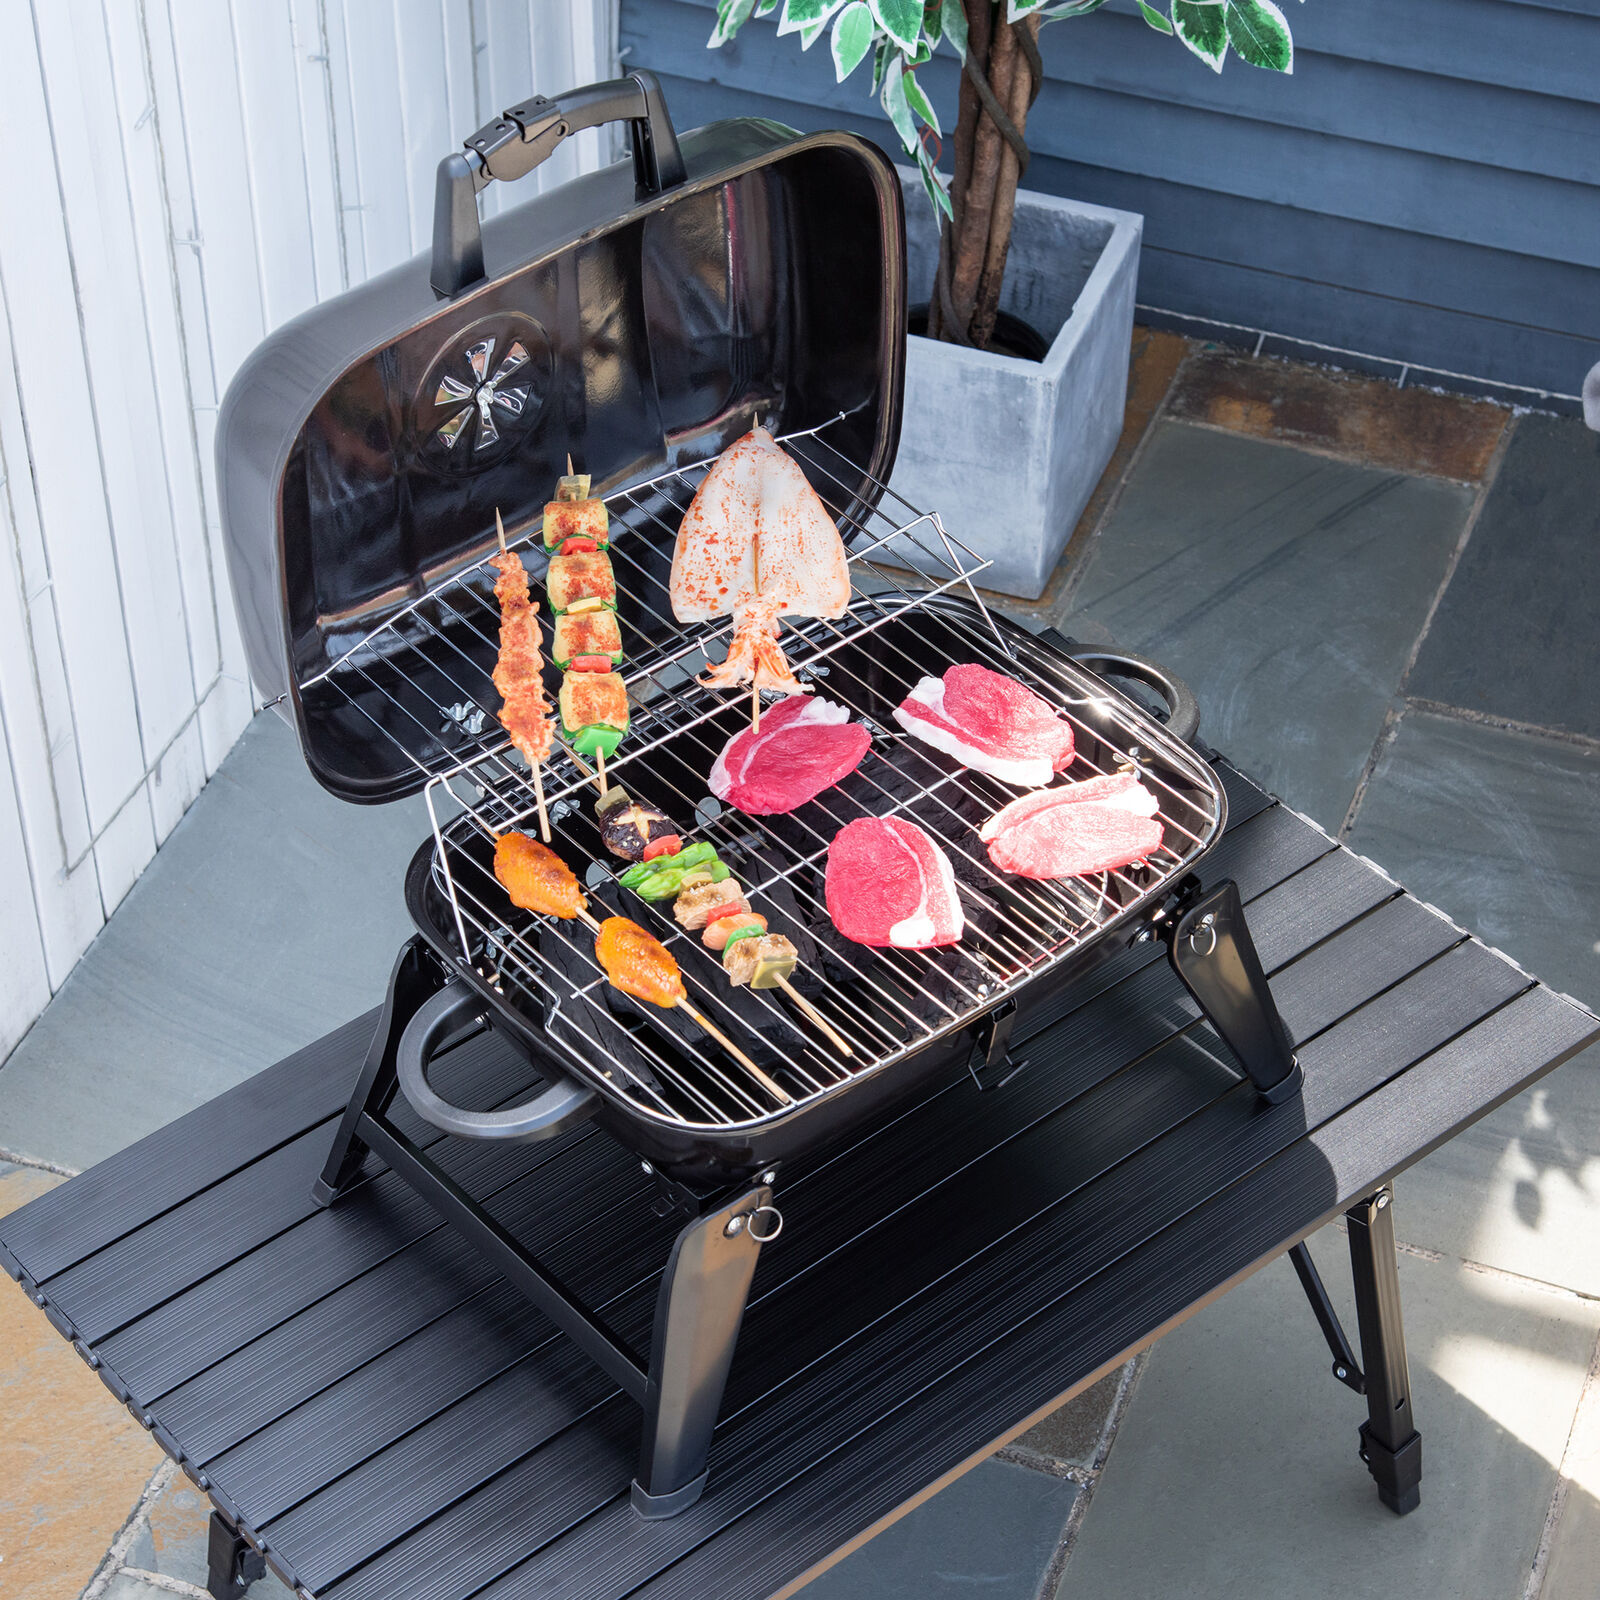 YouLoveIt Outdoor BBQ Grill Charcoal 48 Inch Charcoal Grill and Offset Smoker, BBQ Grill Charcoal Barbecue Pit Patio Backyard Meat Cooker Smoker for Large Event Gathering, Outdoor Camping - image 2 of 8